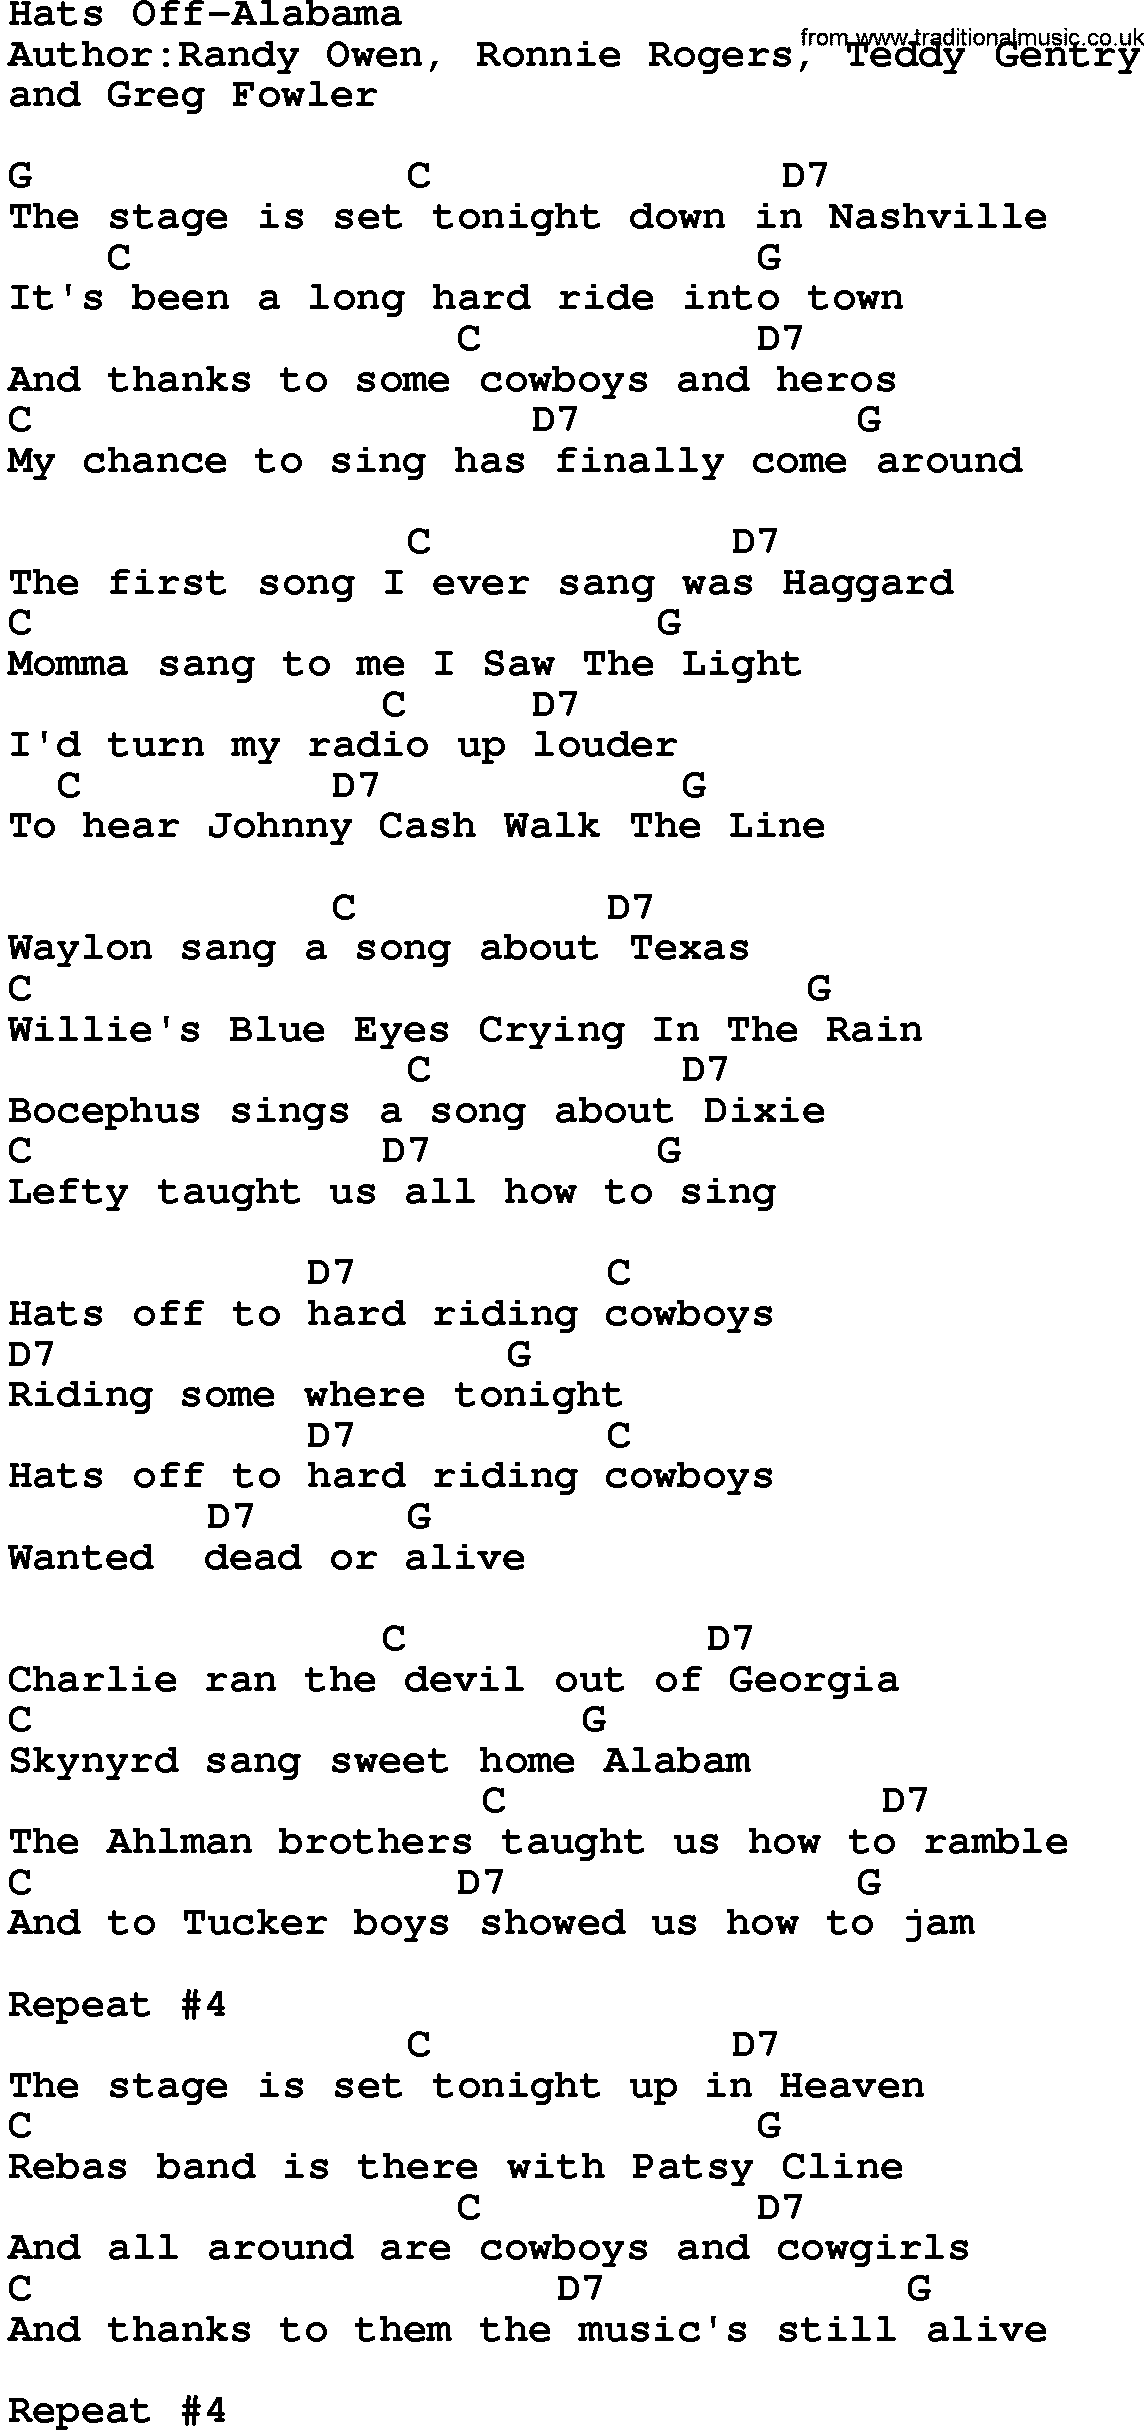 Country music song: Hats Off-Alabama lyrics and chords